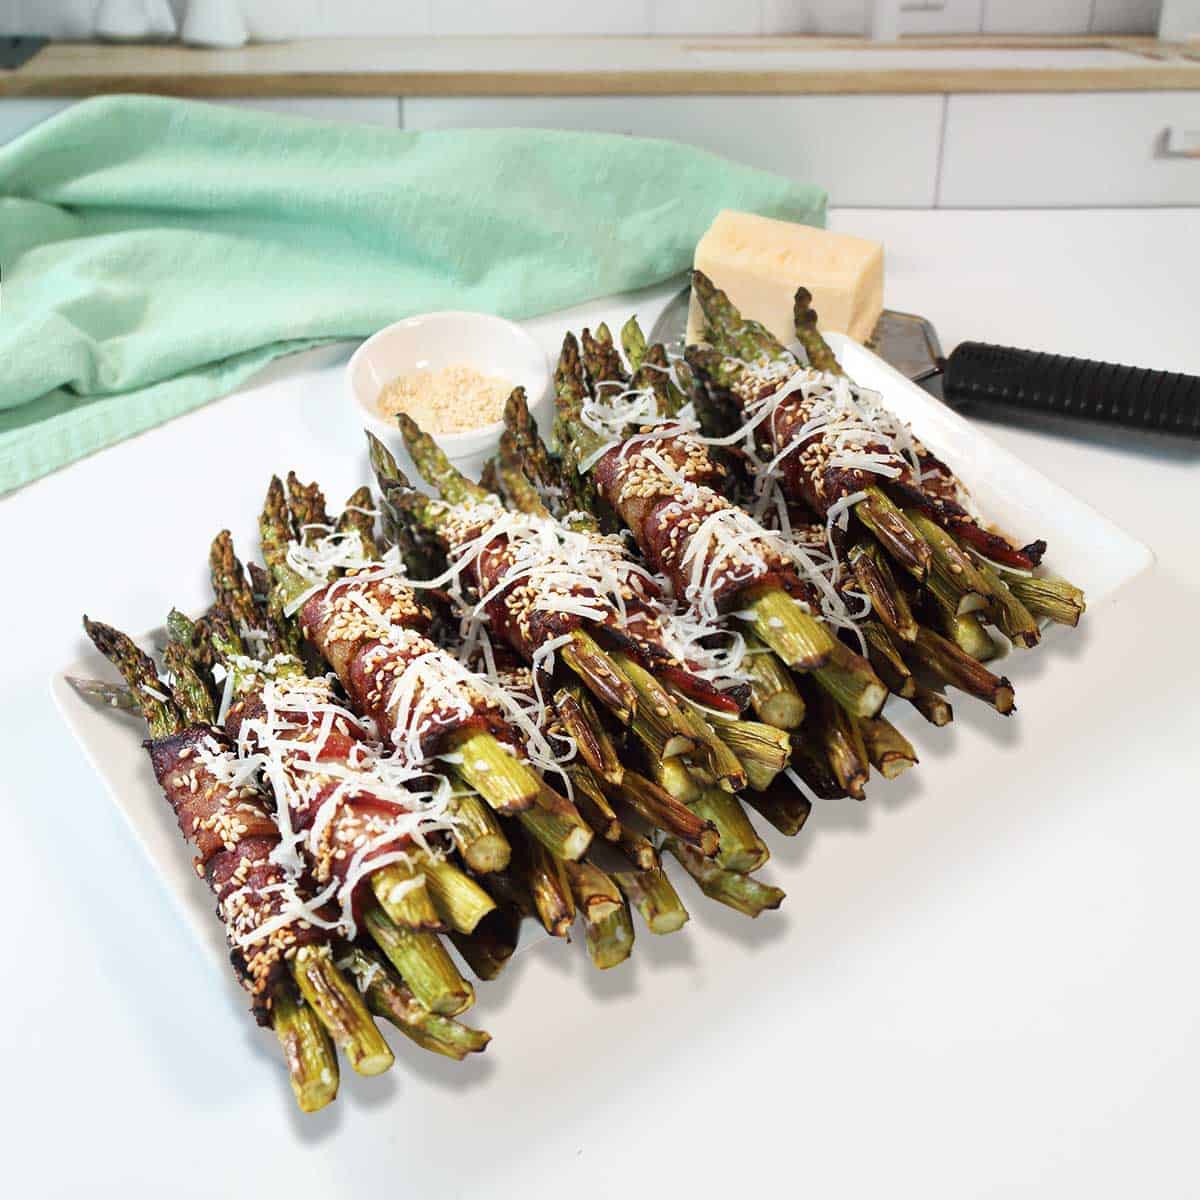 Air fryer asparagus sprinkled with cheese.